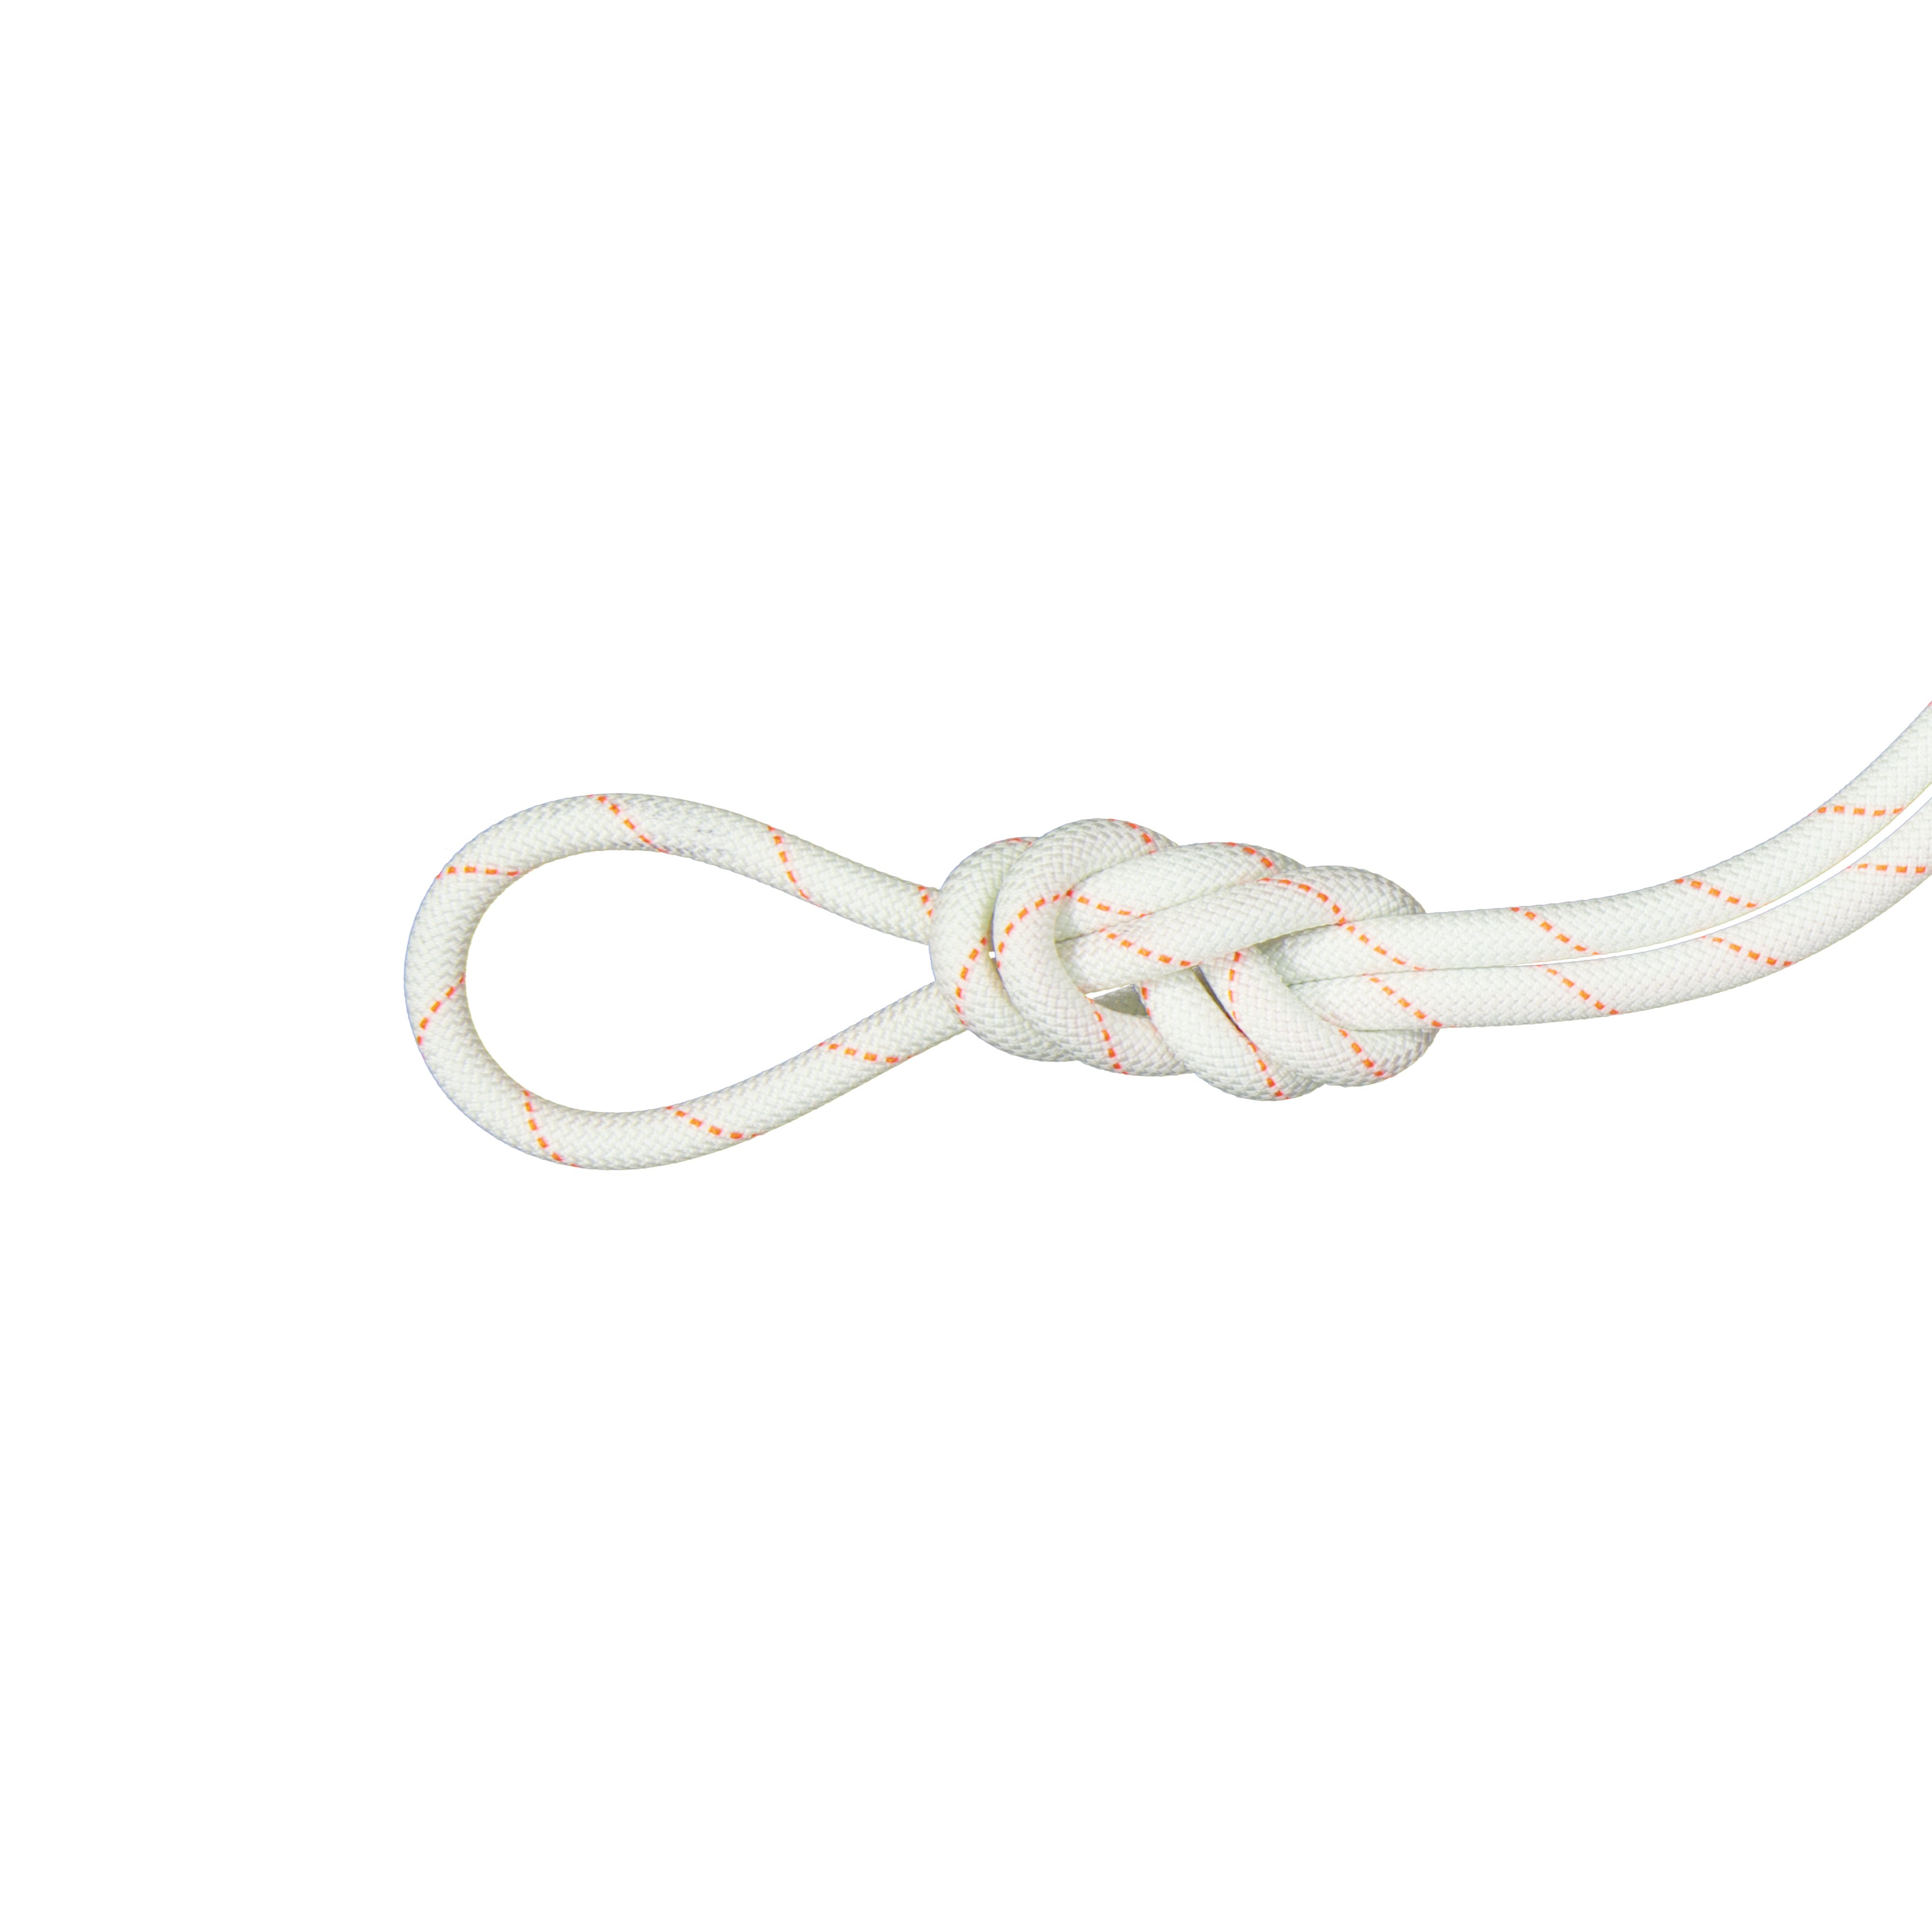 9.9 Gym Workhorse Dry Rope - Dry Standard, white, 40 m thumbnail